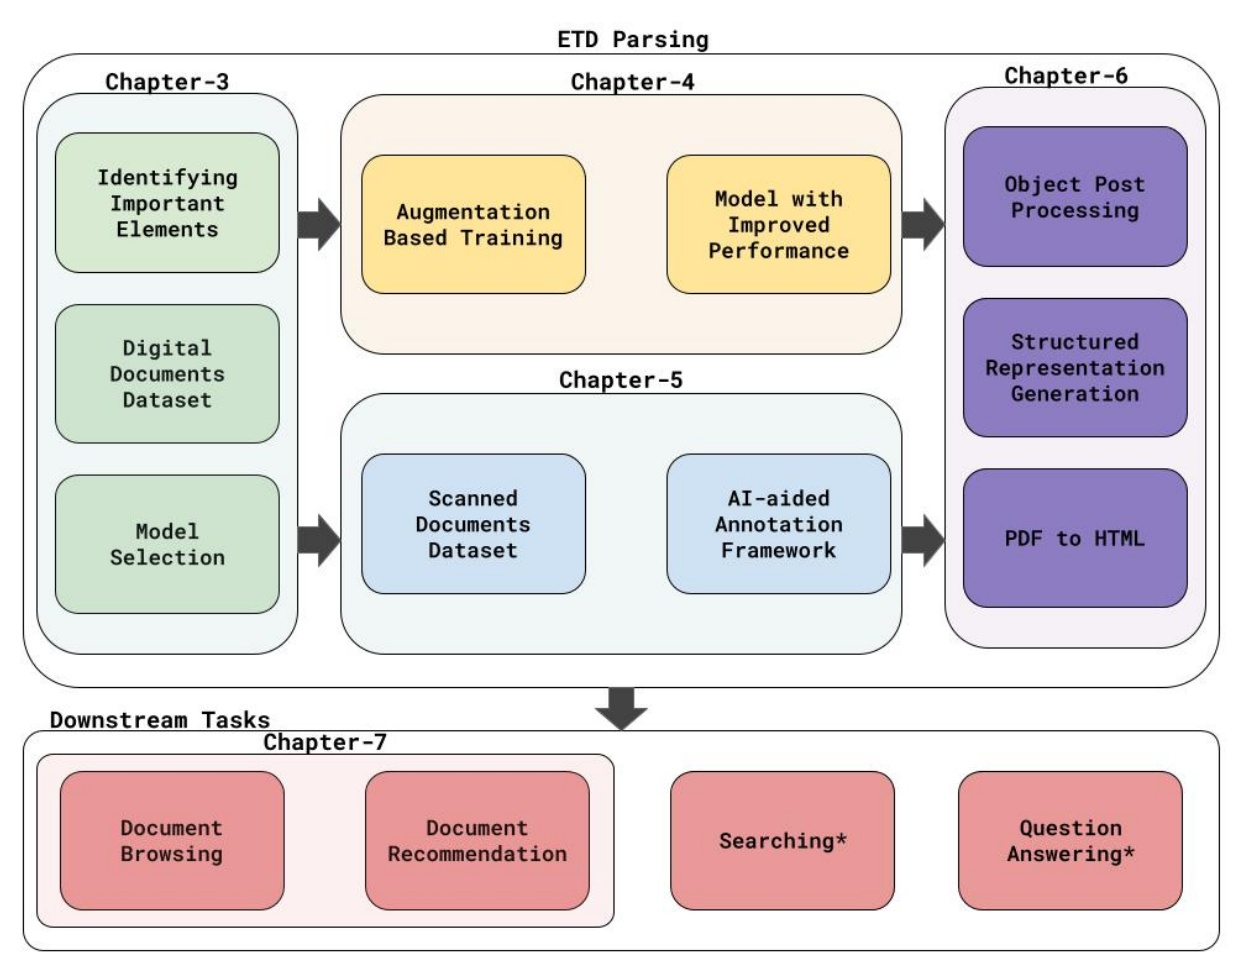 Figure 1.1: An overview of the different chapters, along with their key components, as
proposed in this thesis. (* indicates the components are largely beyond the scope of this
thesis.)